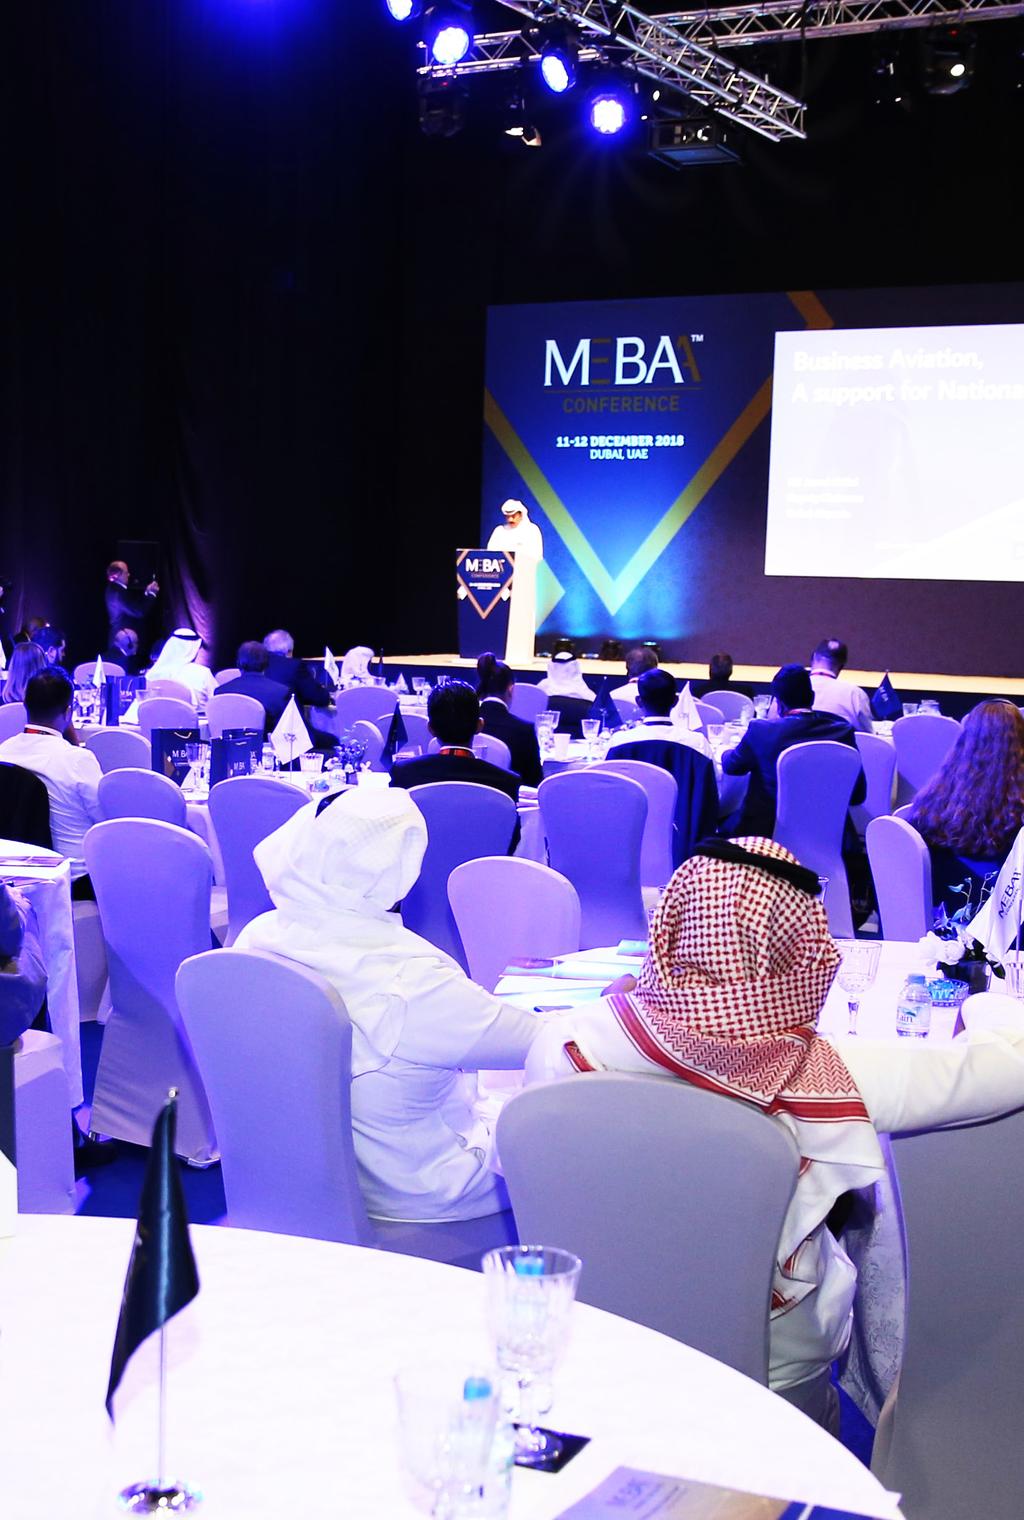 MEBAA CONFERENCES MEBAA Conferences in 2018 gathered experts from across the Middle East and North Africa to address issues related to specific areas of business aviation and communicate the effect